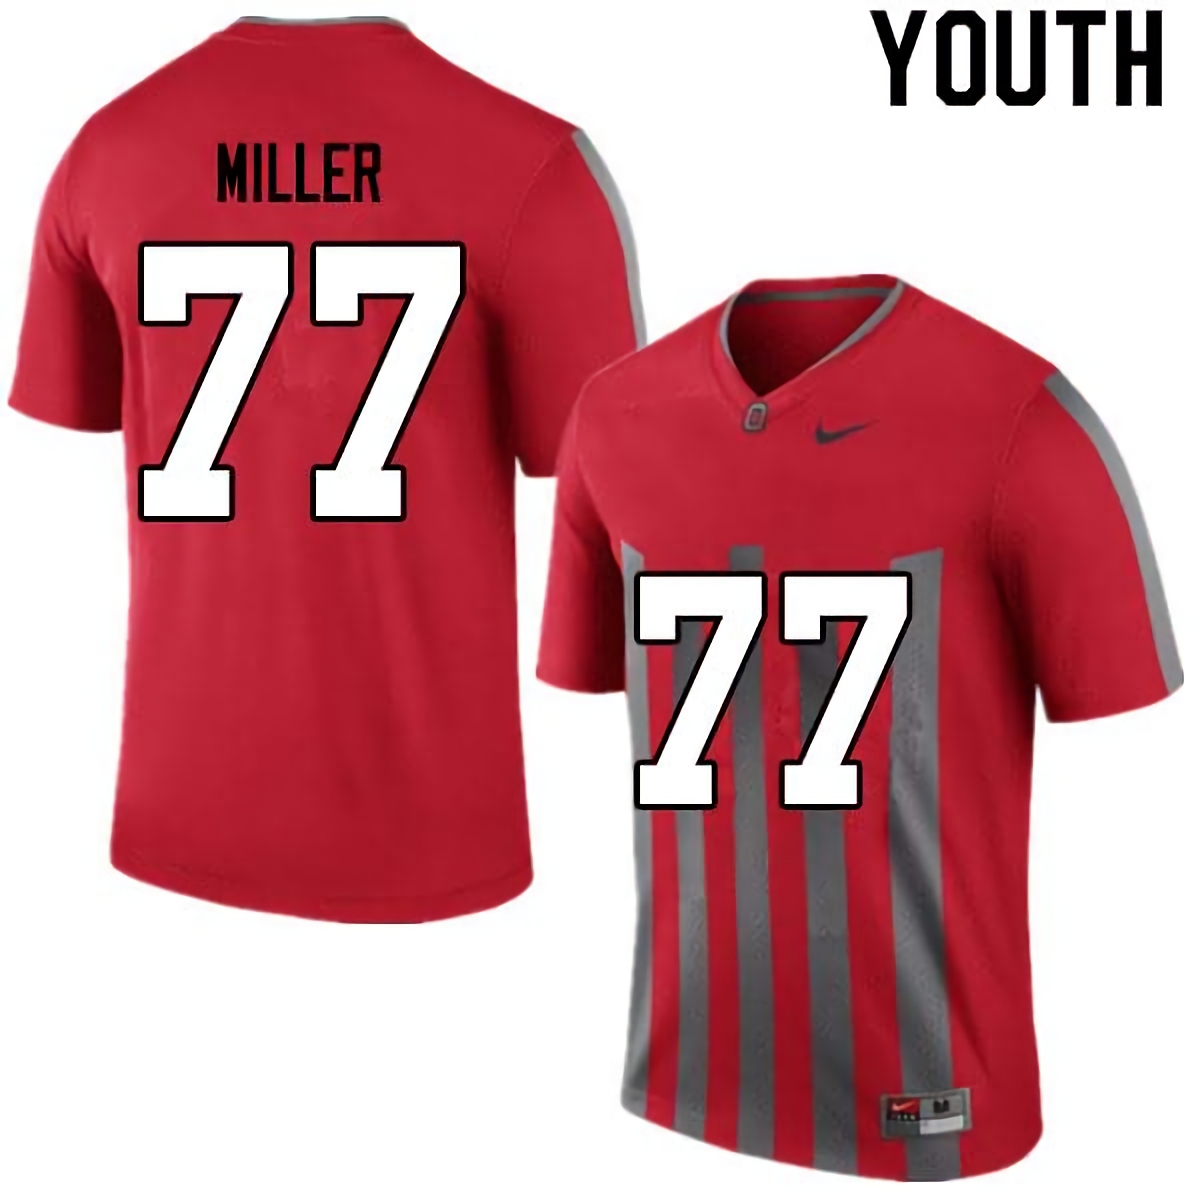 Harry Miller Ohio State Buckeyes Youth NCAA #77 Nike Retro College Stitched Football Jersey RLX7356YD